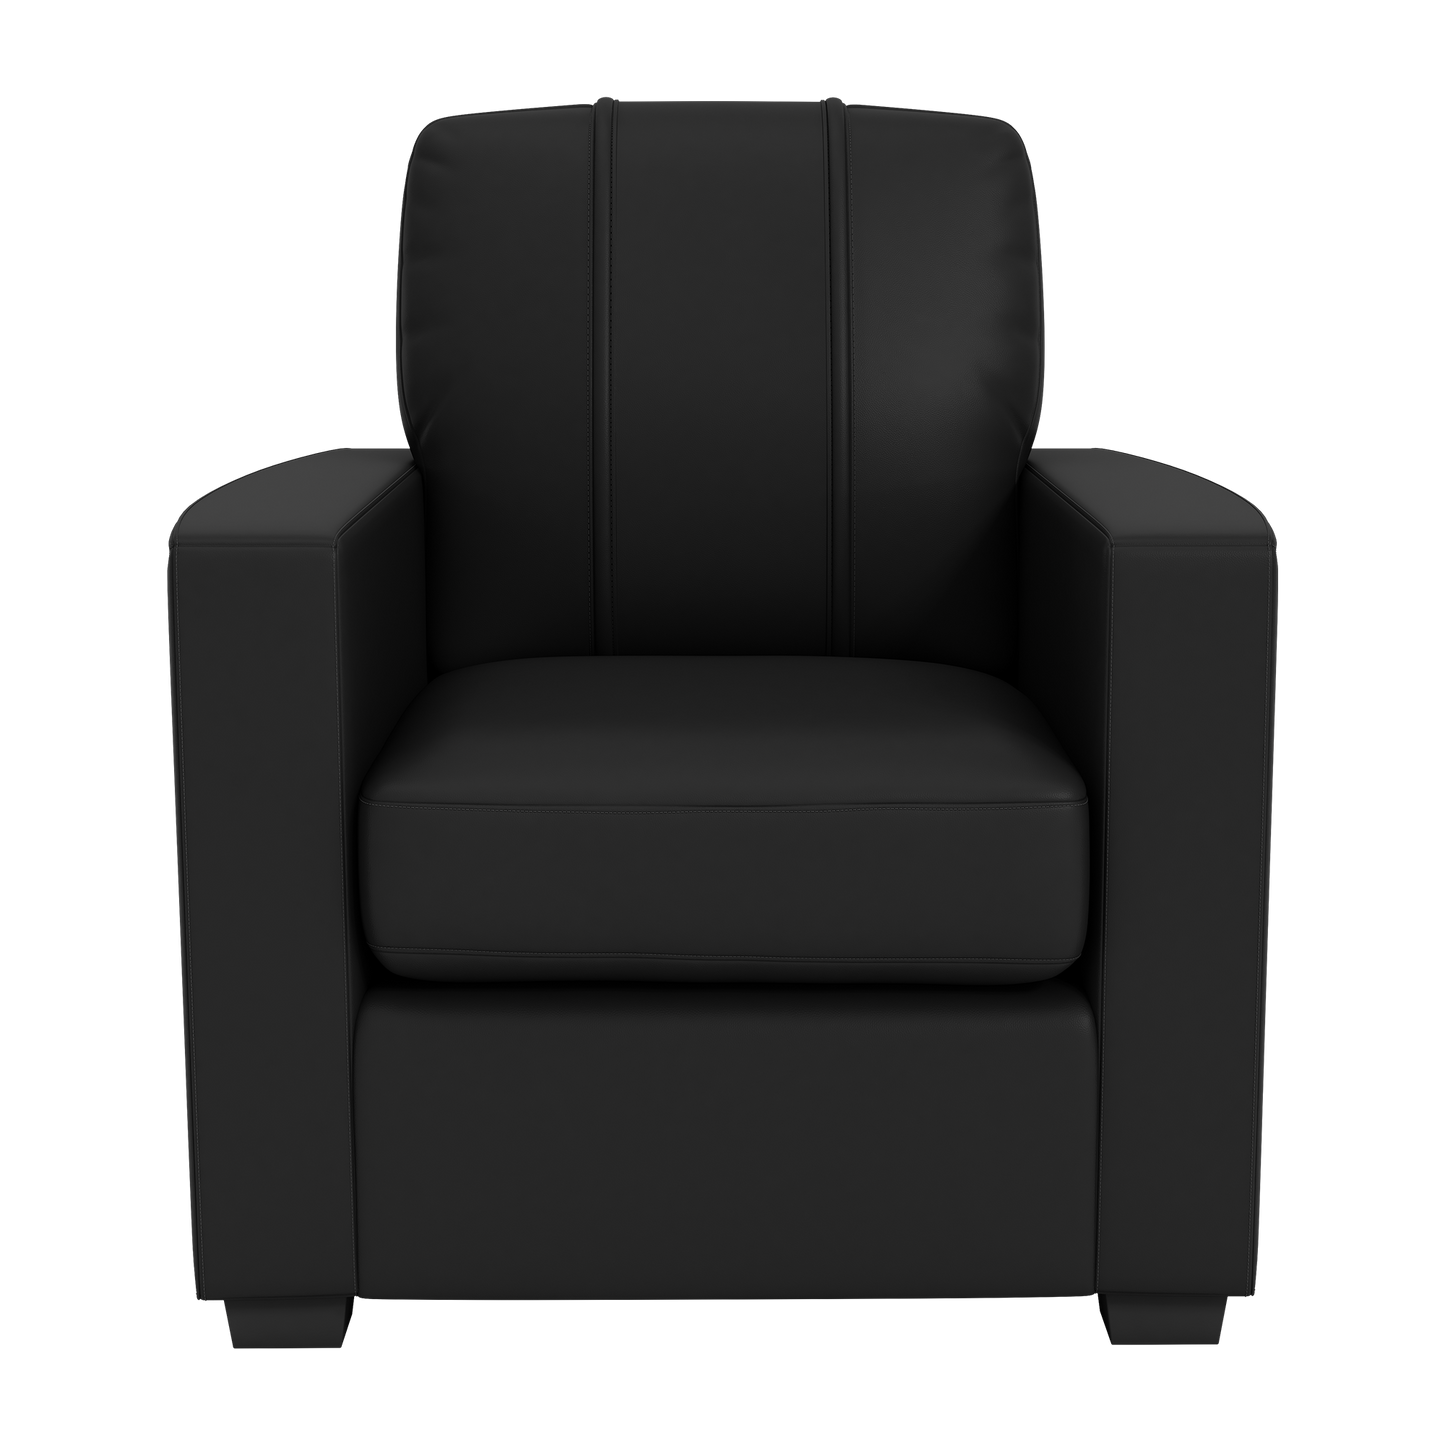 Silver Club Chair with Chicago White Sox Secondary